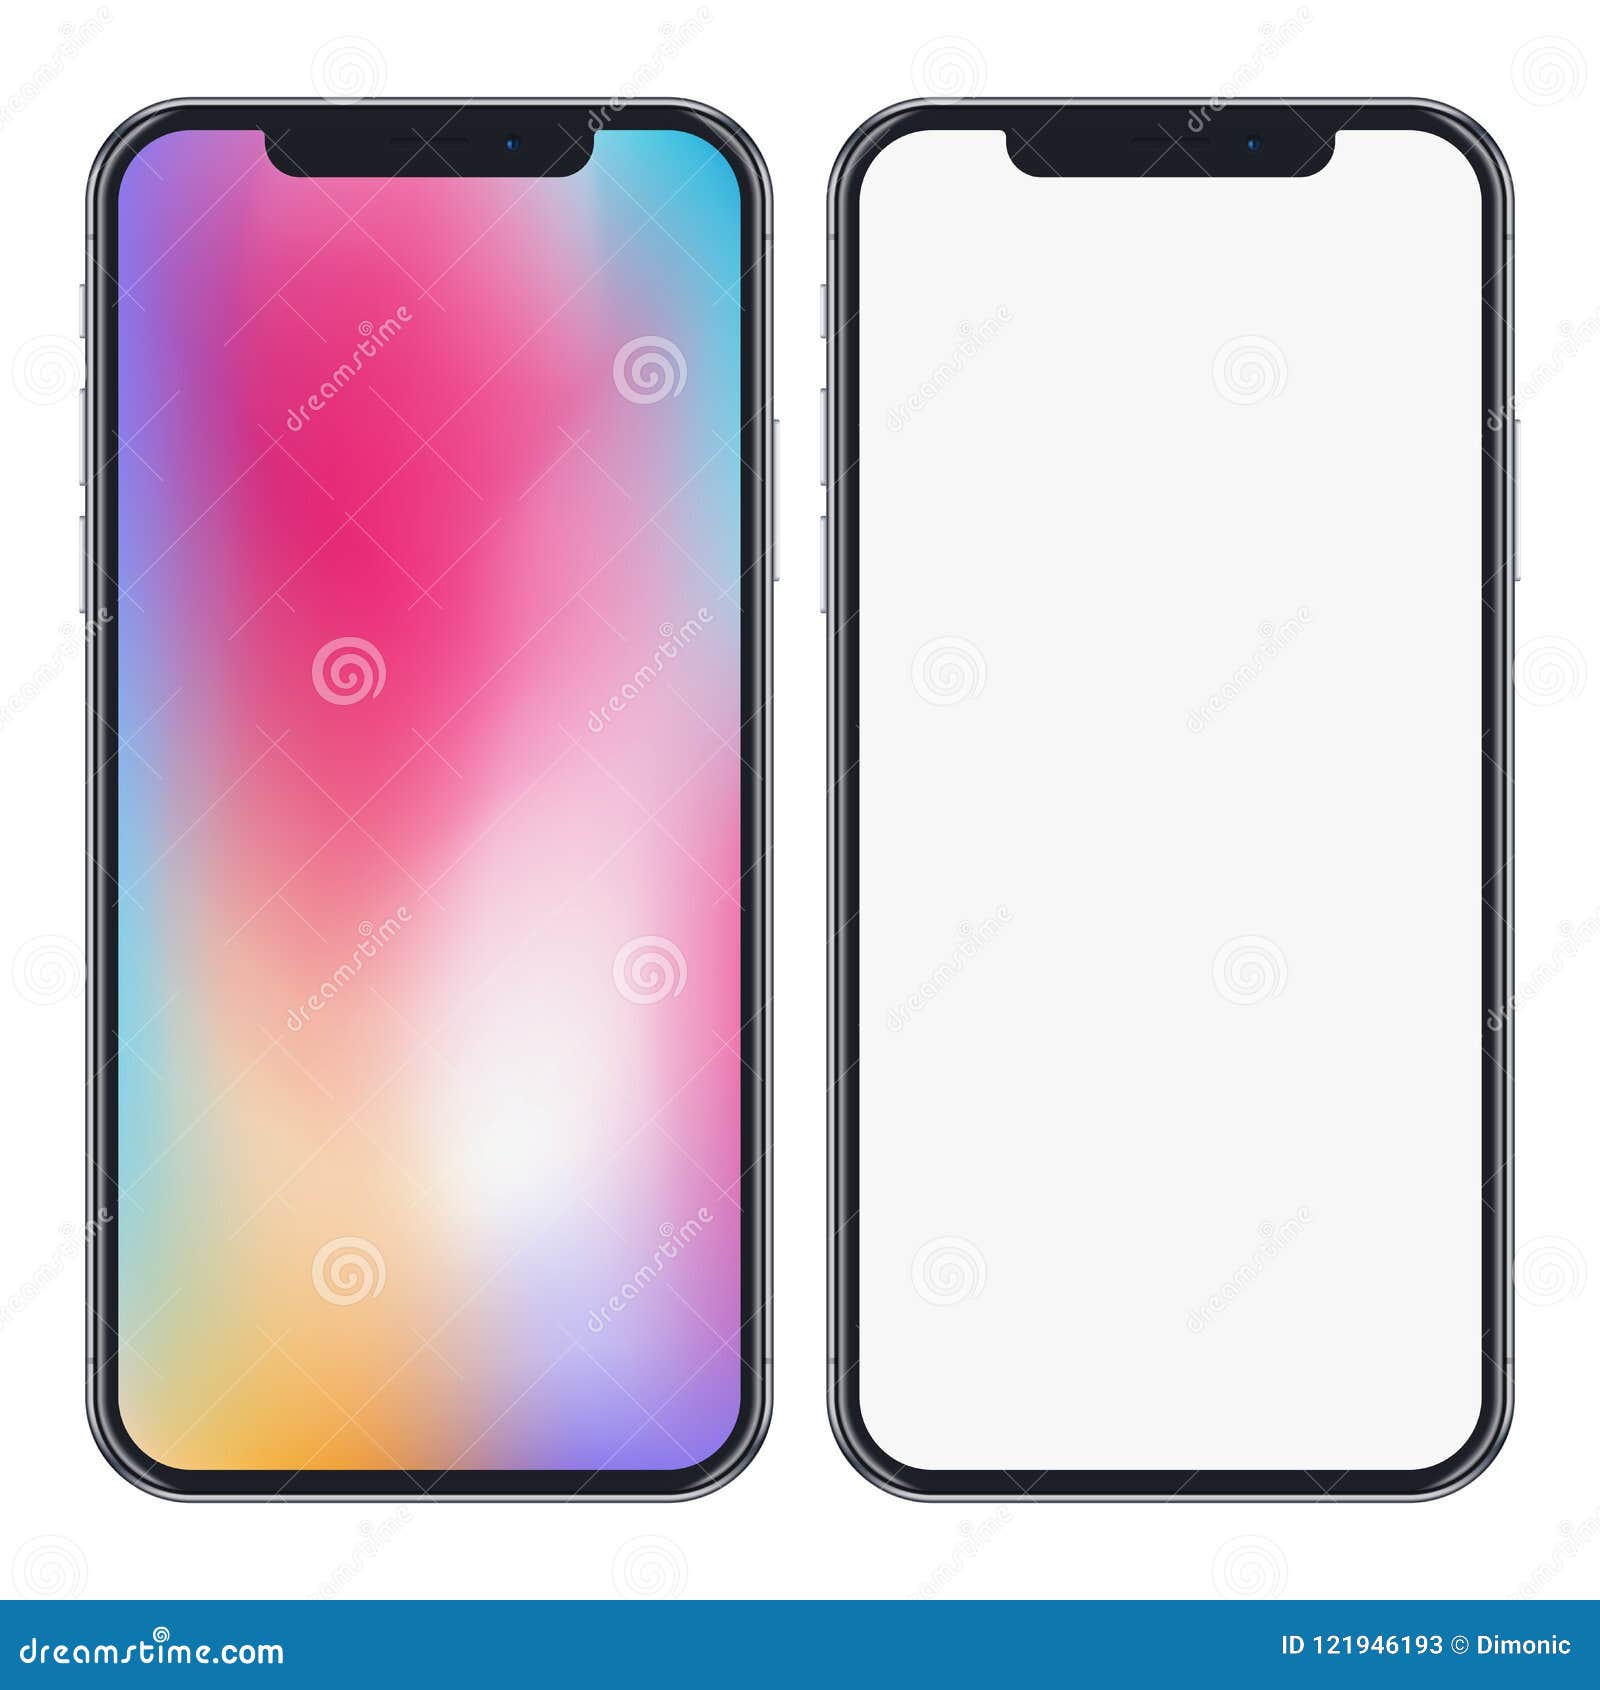 modern phone mockup  on white background. high detailed realistic smartphone and colorful screen. eps 10